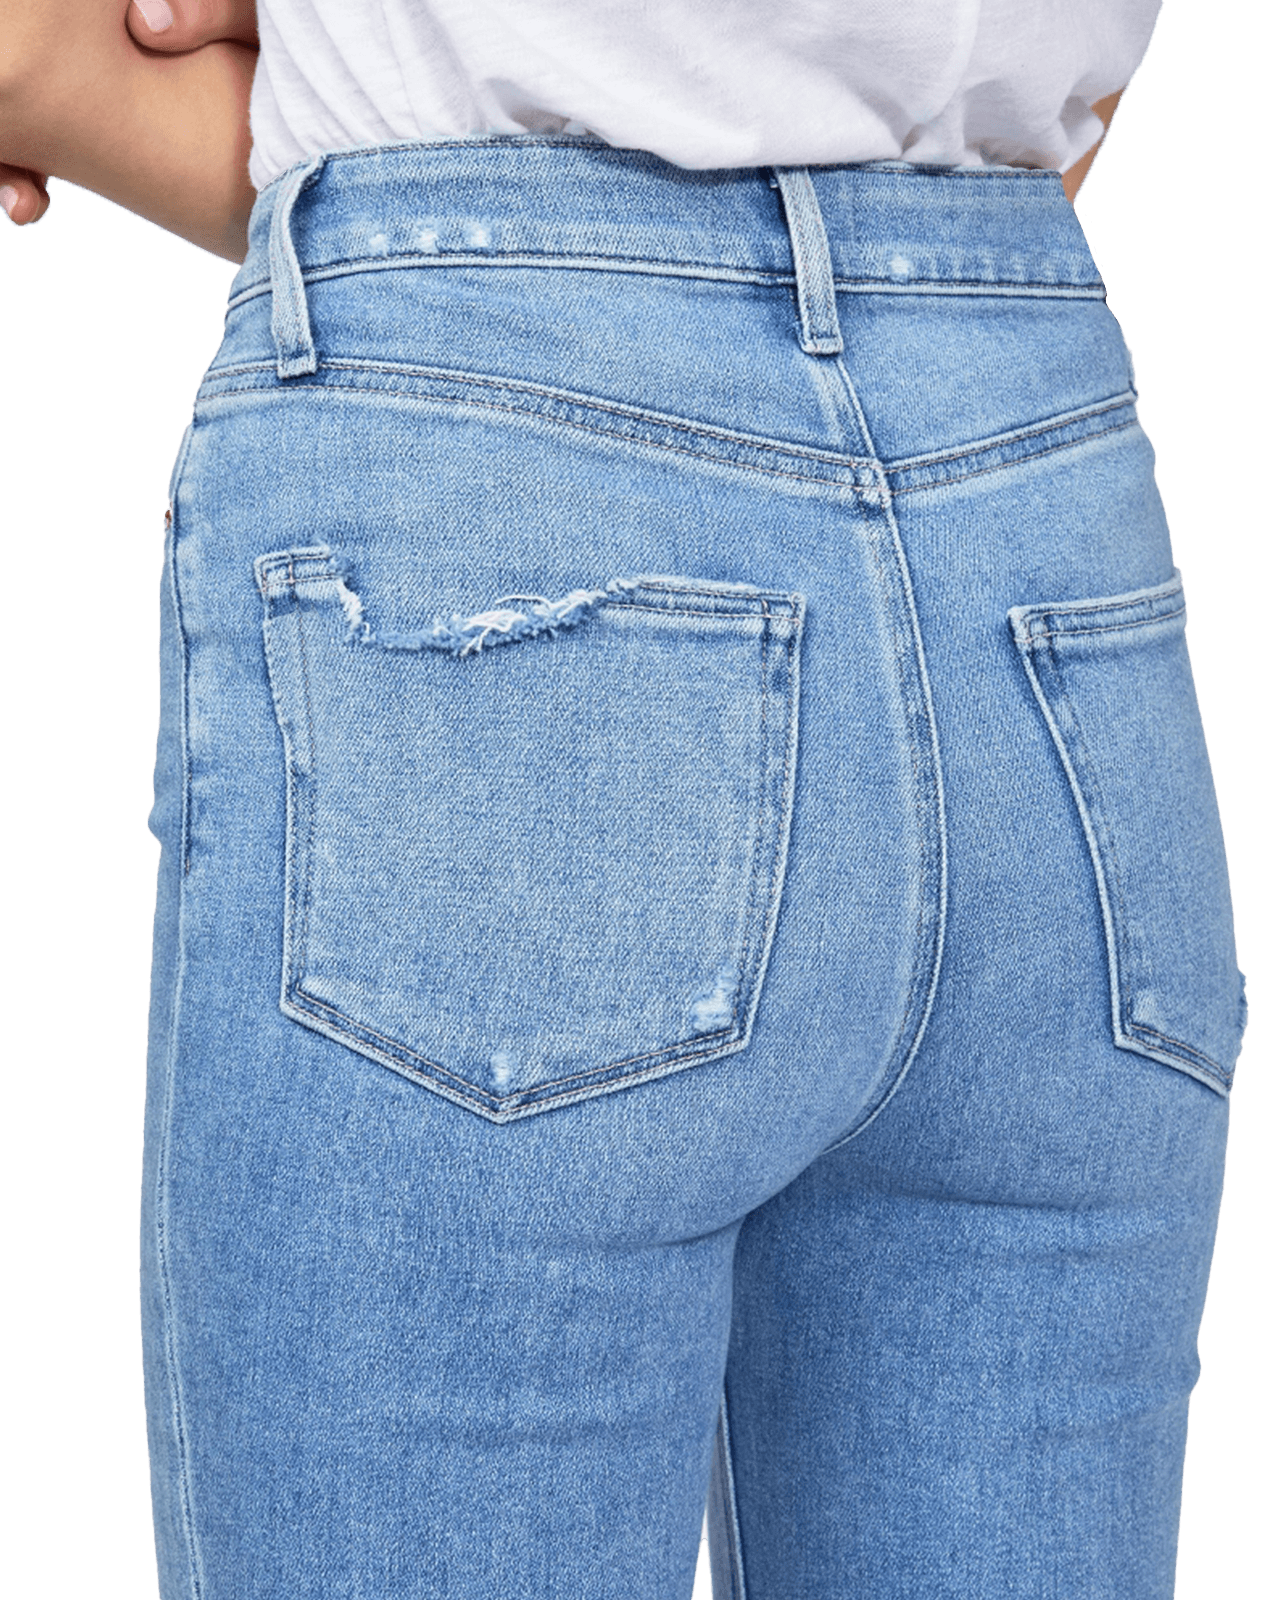 denim and hyde Ultra High Rise Cindy – Lovesong Distressed 5